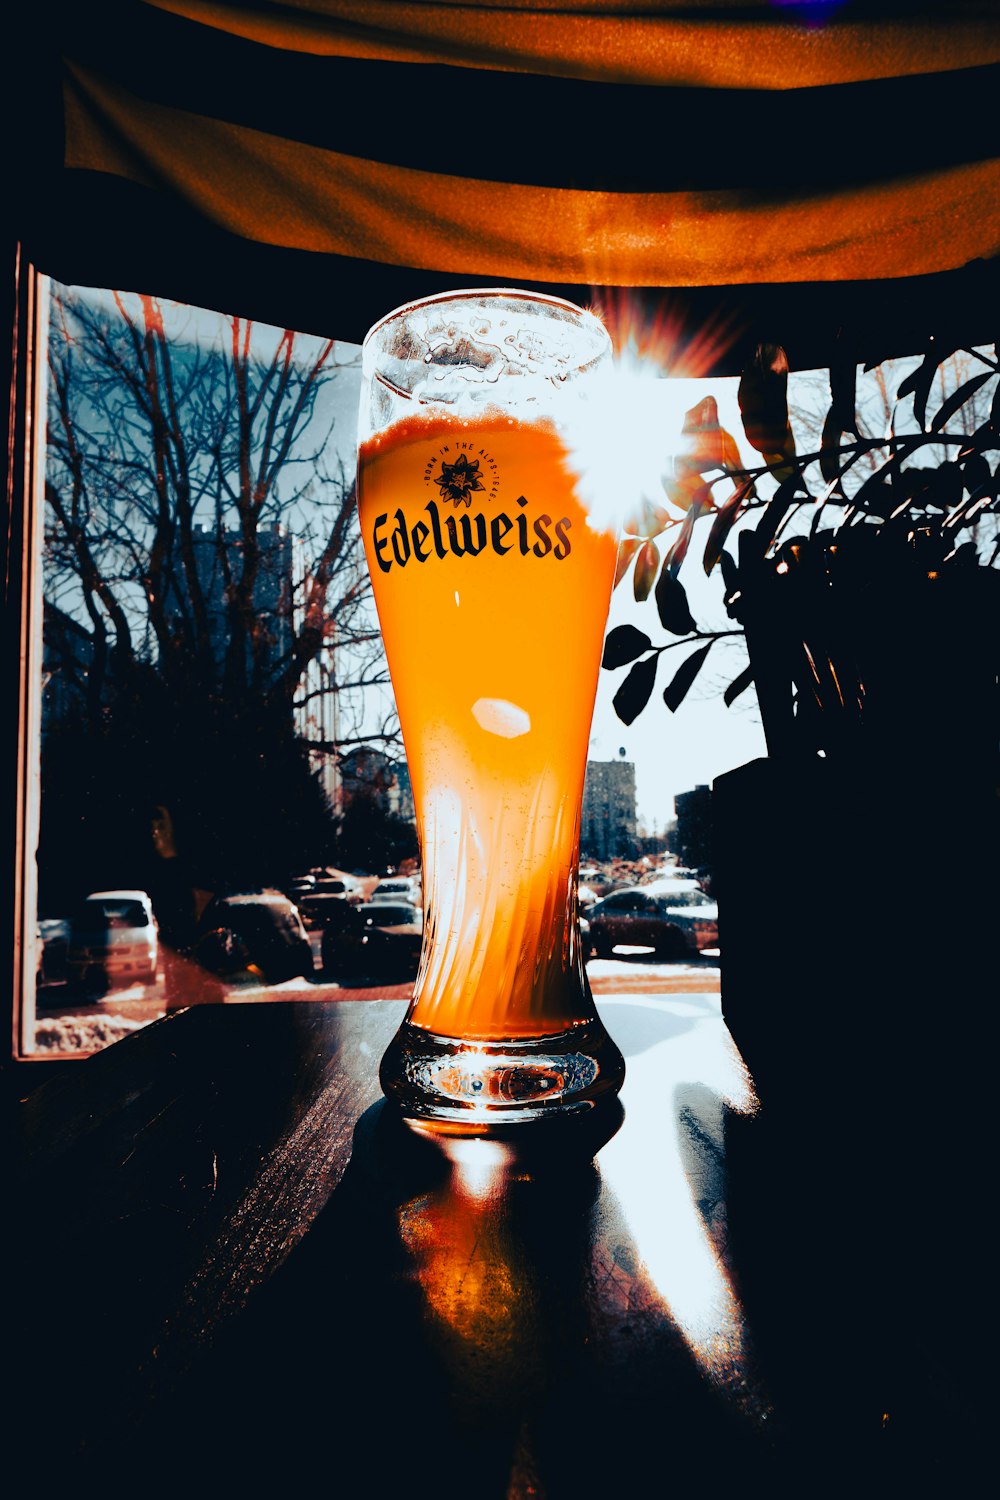 a glass of beer sitting on top of a wooden table